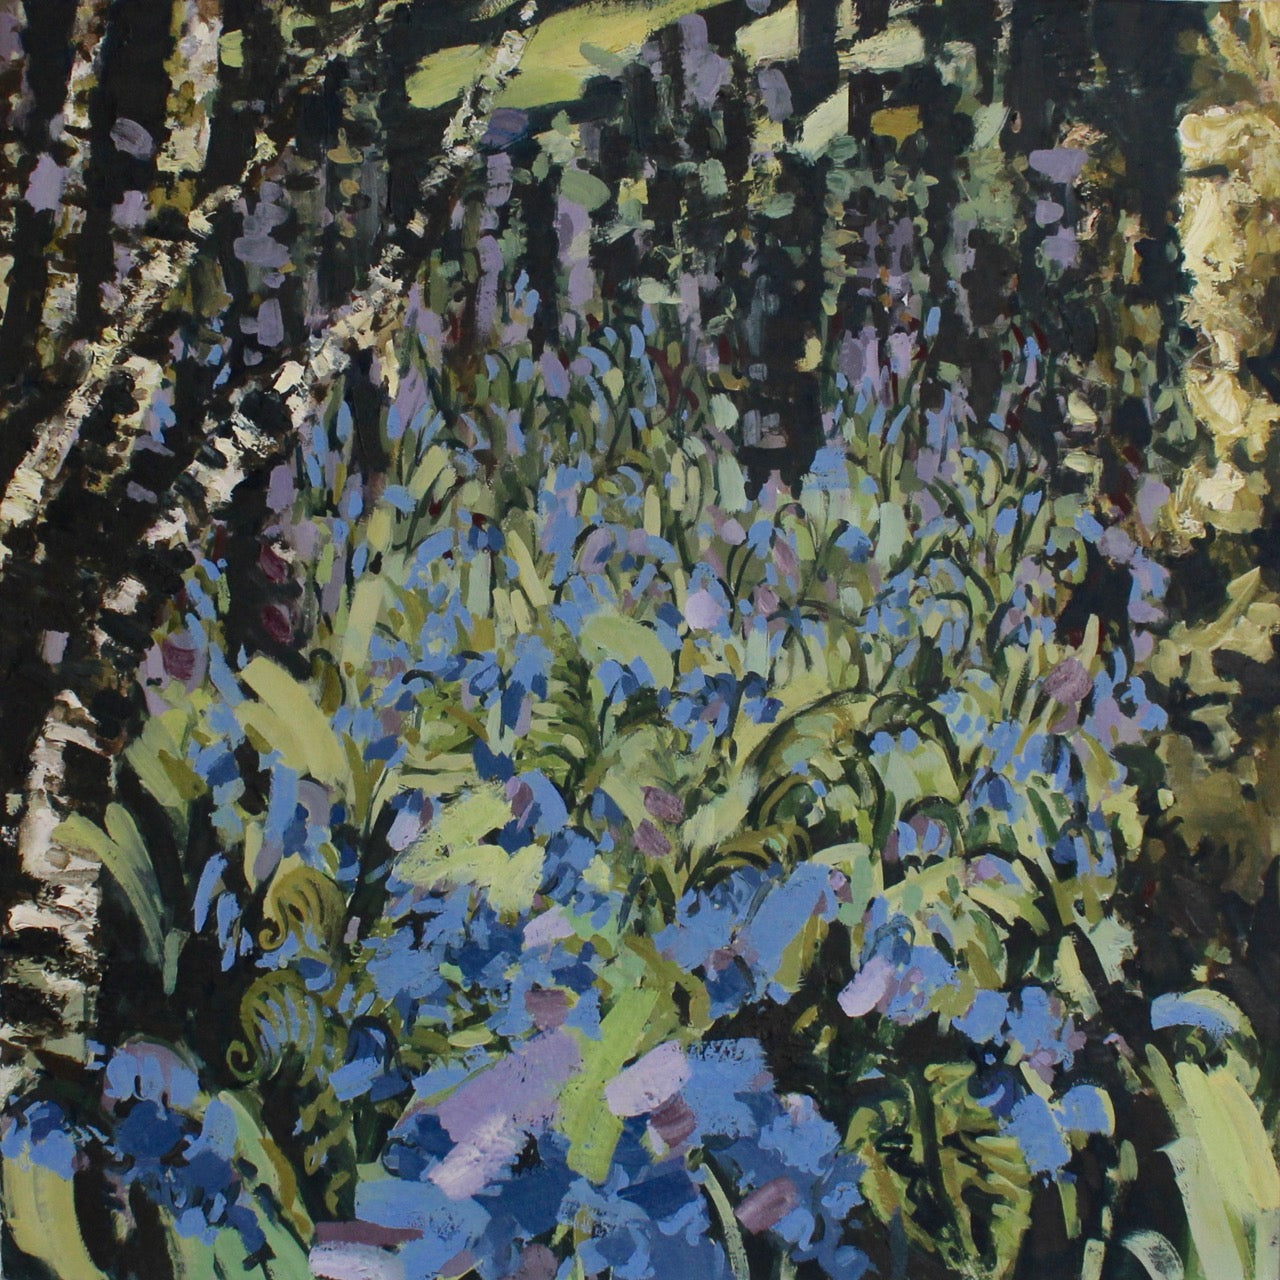 Jill Hudson, 'Bluebell Riot' an abstract painting of purple and blue bluebells in a wood